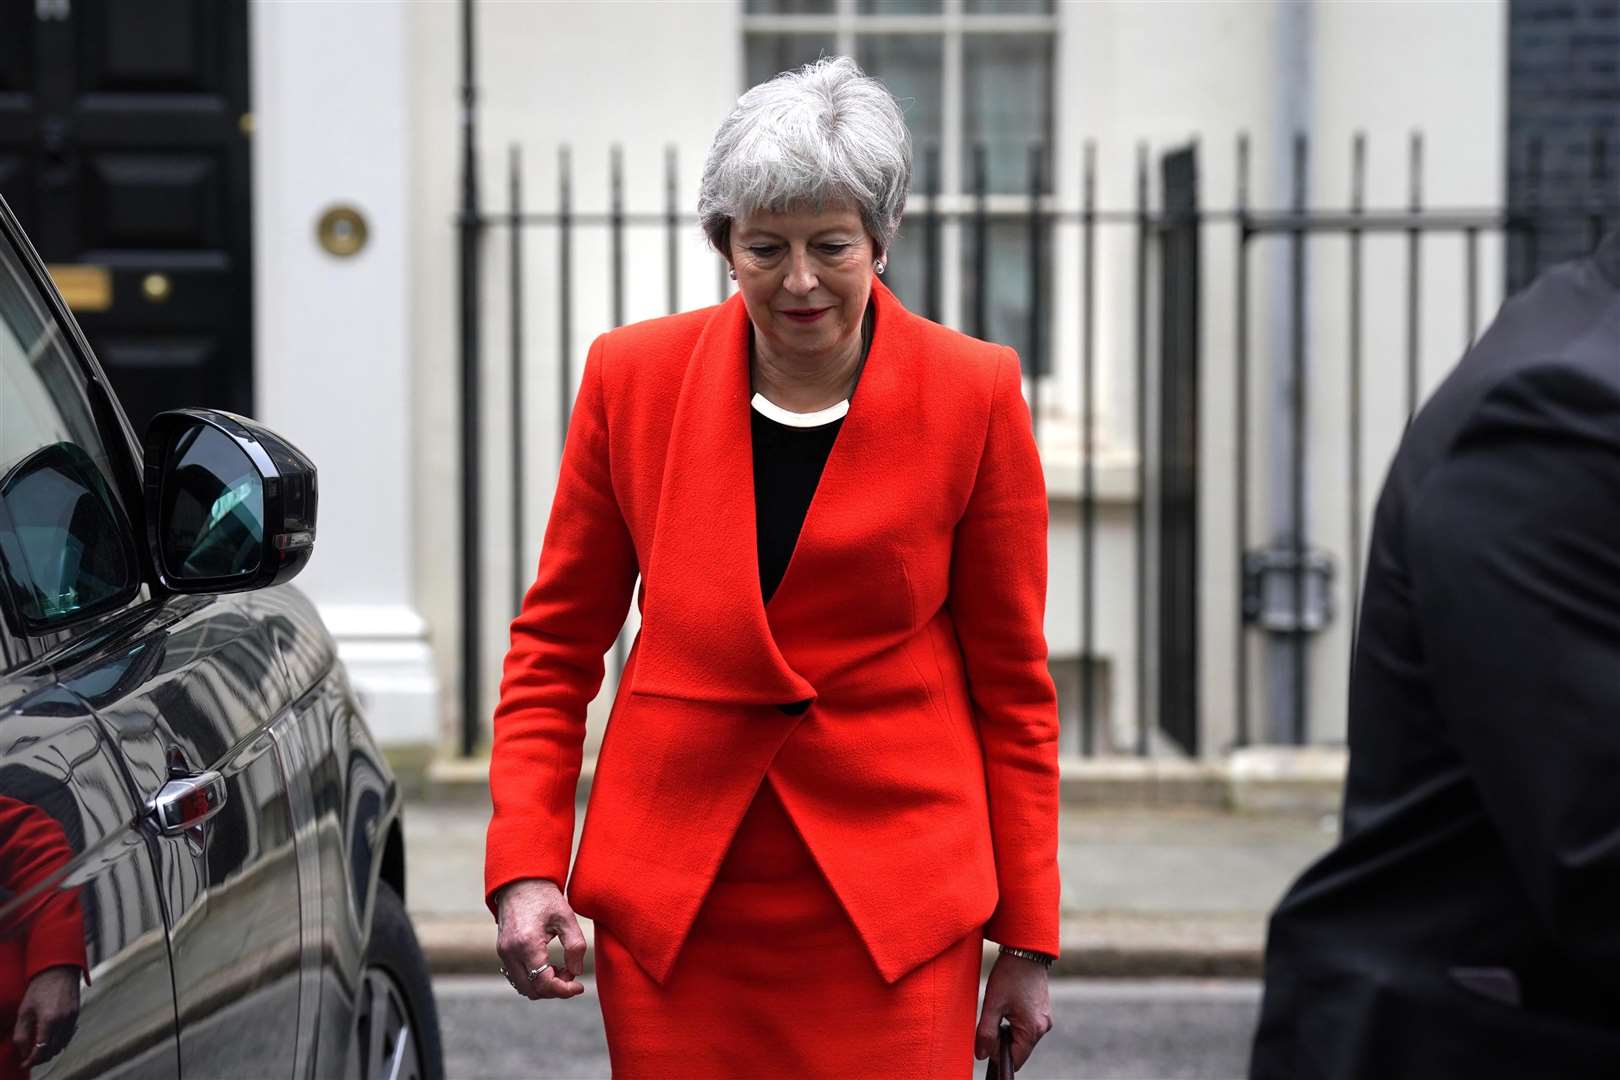 Theresa May followed Boris Johnson and David Cameron to become the latest Conservative former prime minister to warn against axing HS2’s northern leg (Kirsty O’Connor/PA)